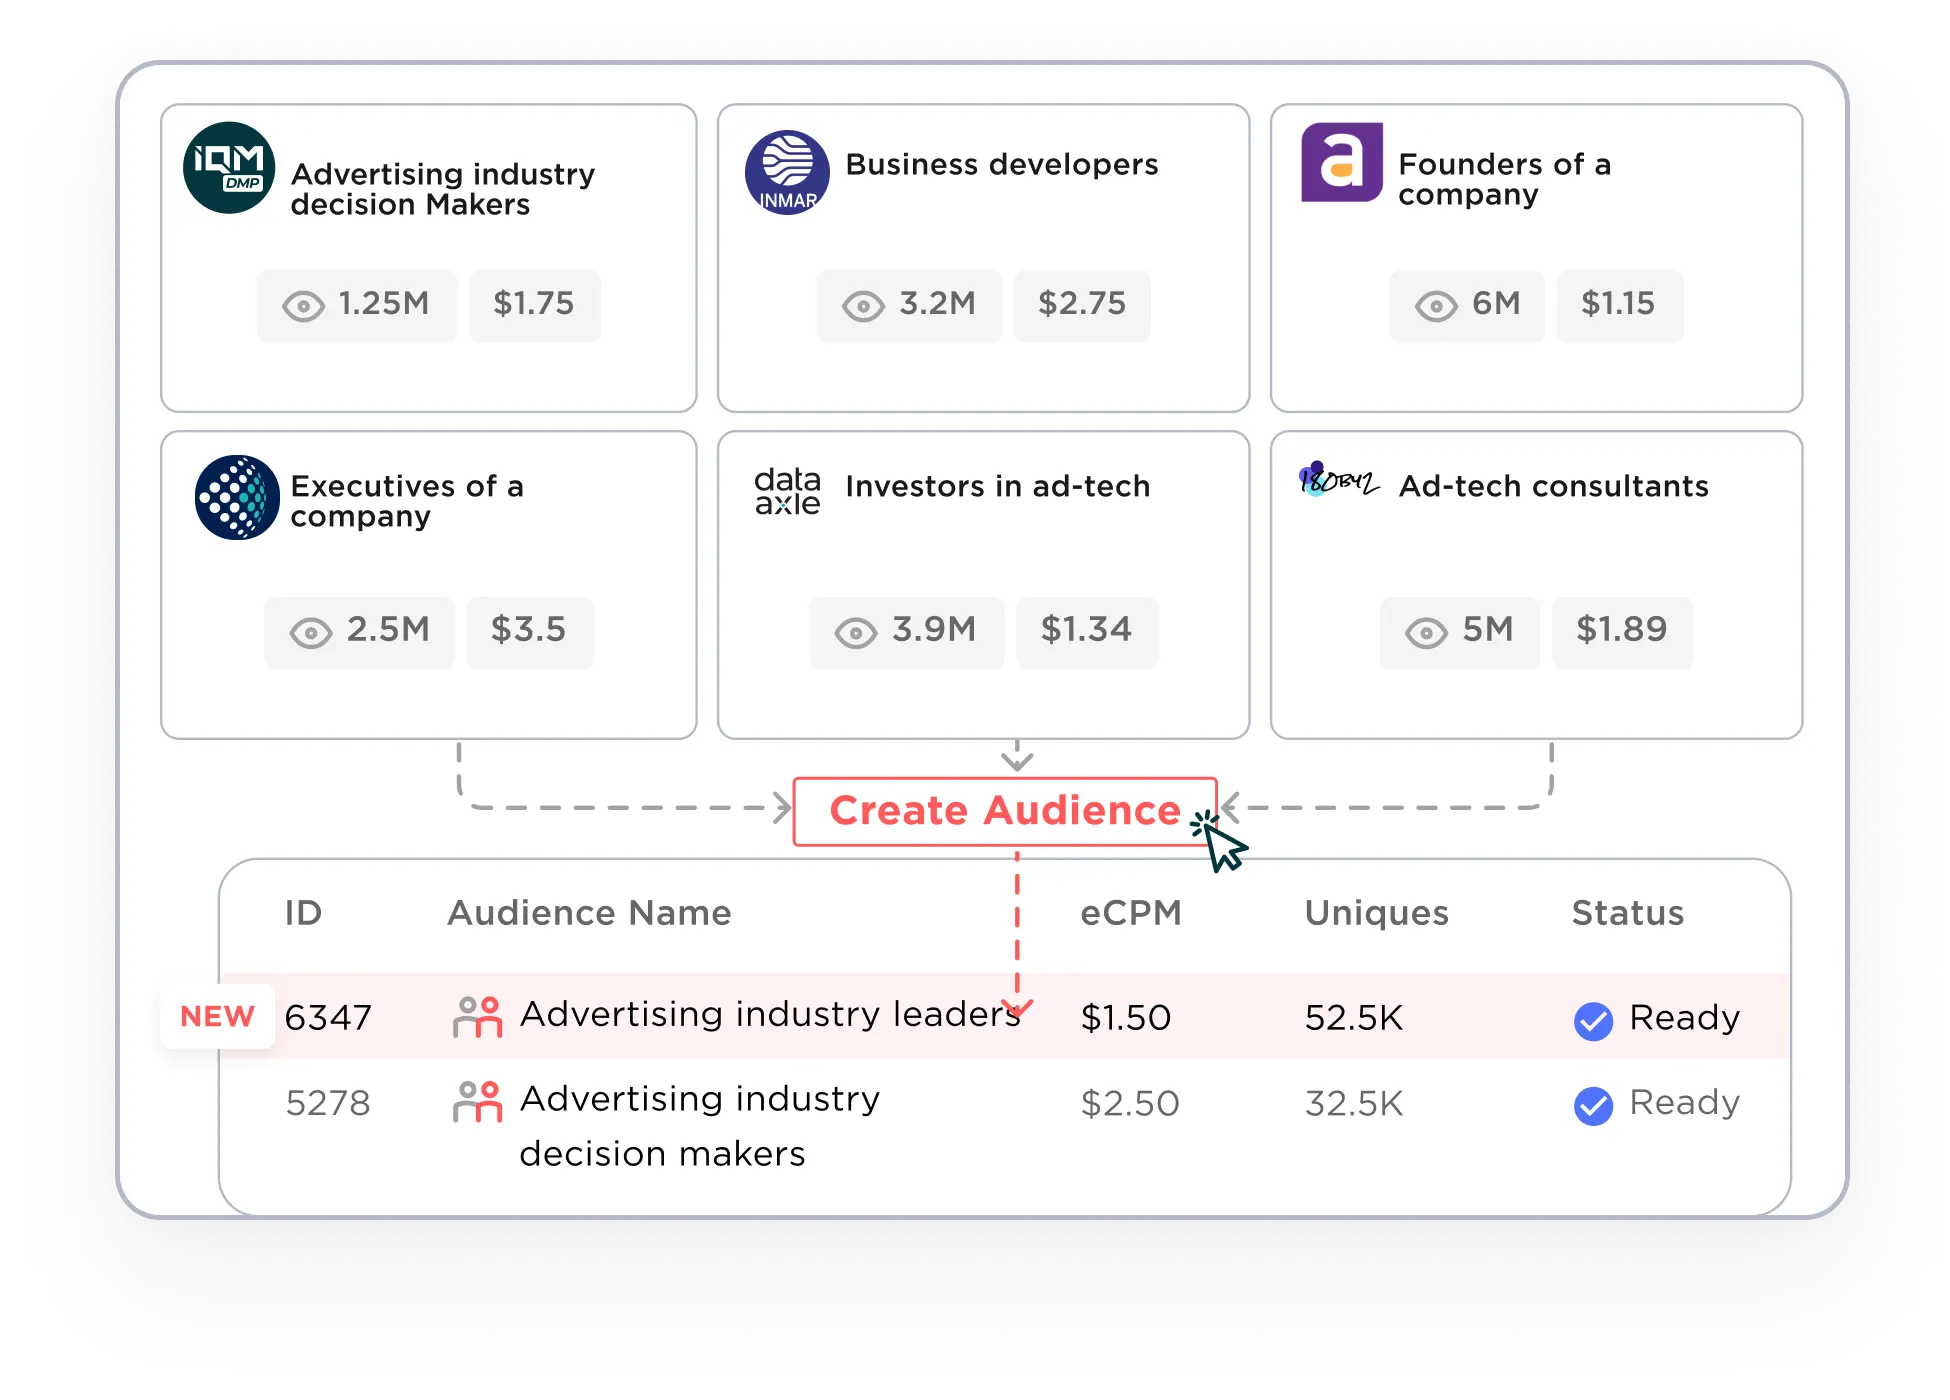 Build your audience on any DMP platform of your choice and push them to activate